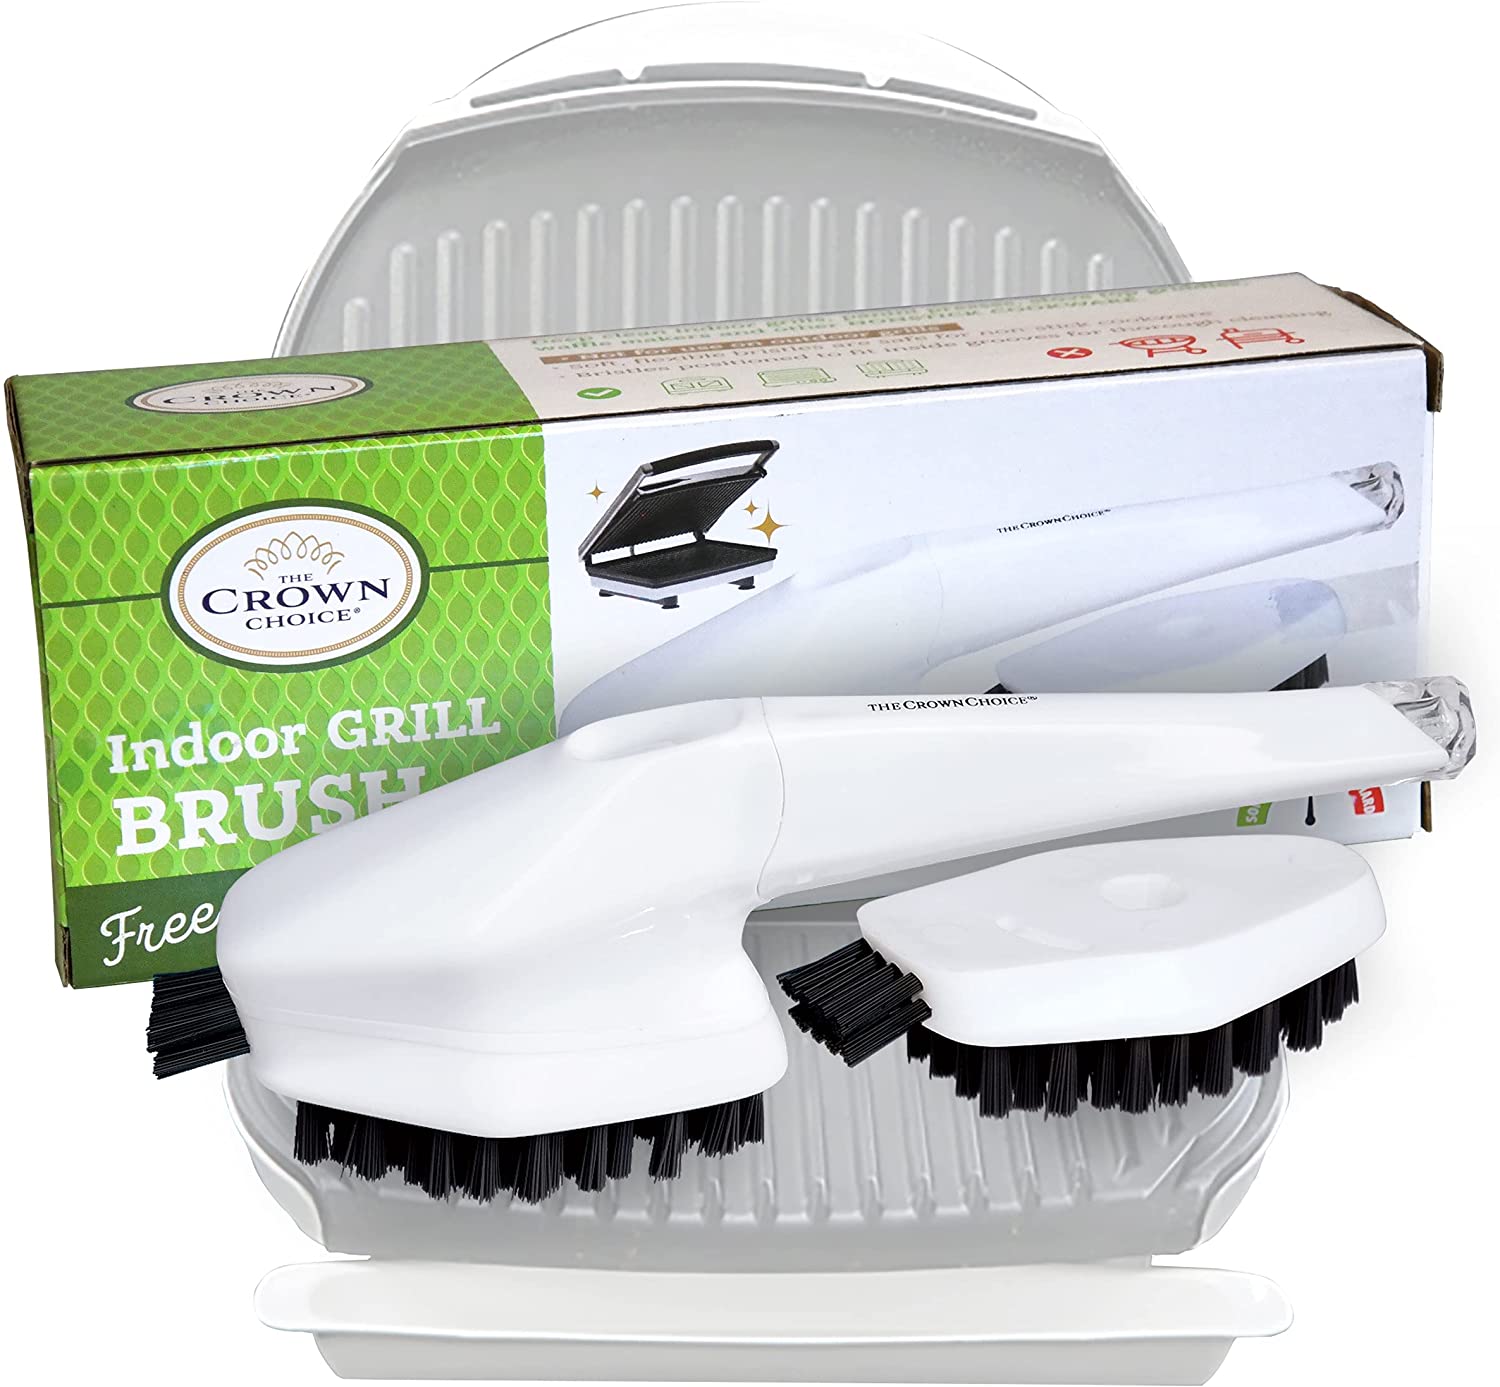 https://www.dontwasteyourmoney.com/wp-content/uploads/2021/09/The-Crown-Choice-Brush-Indoor-Electric-Grill-Cleaner.jpg